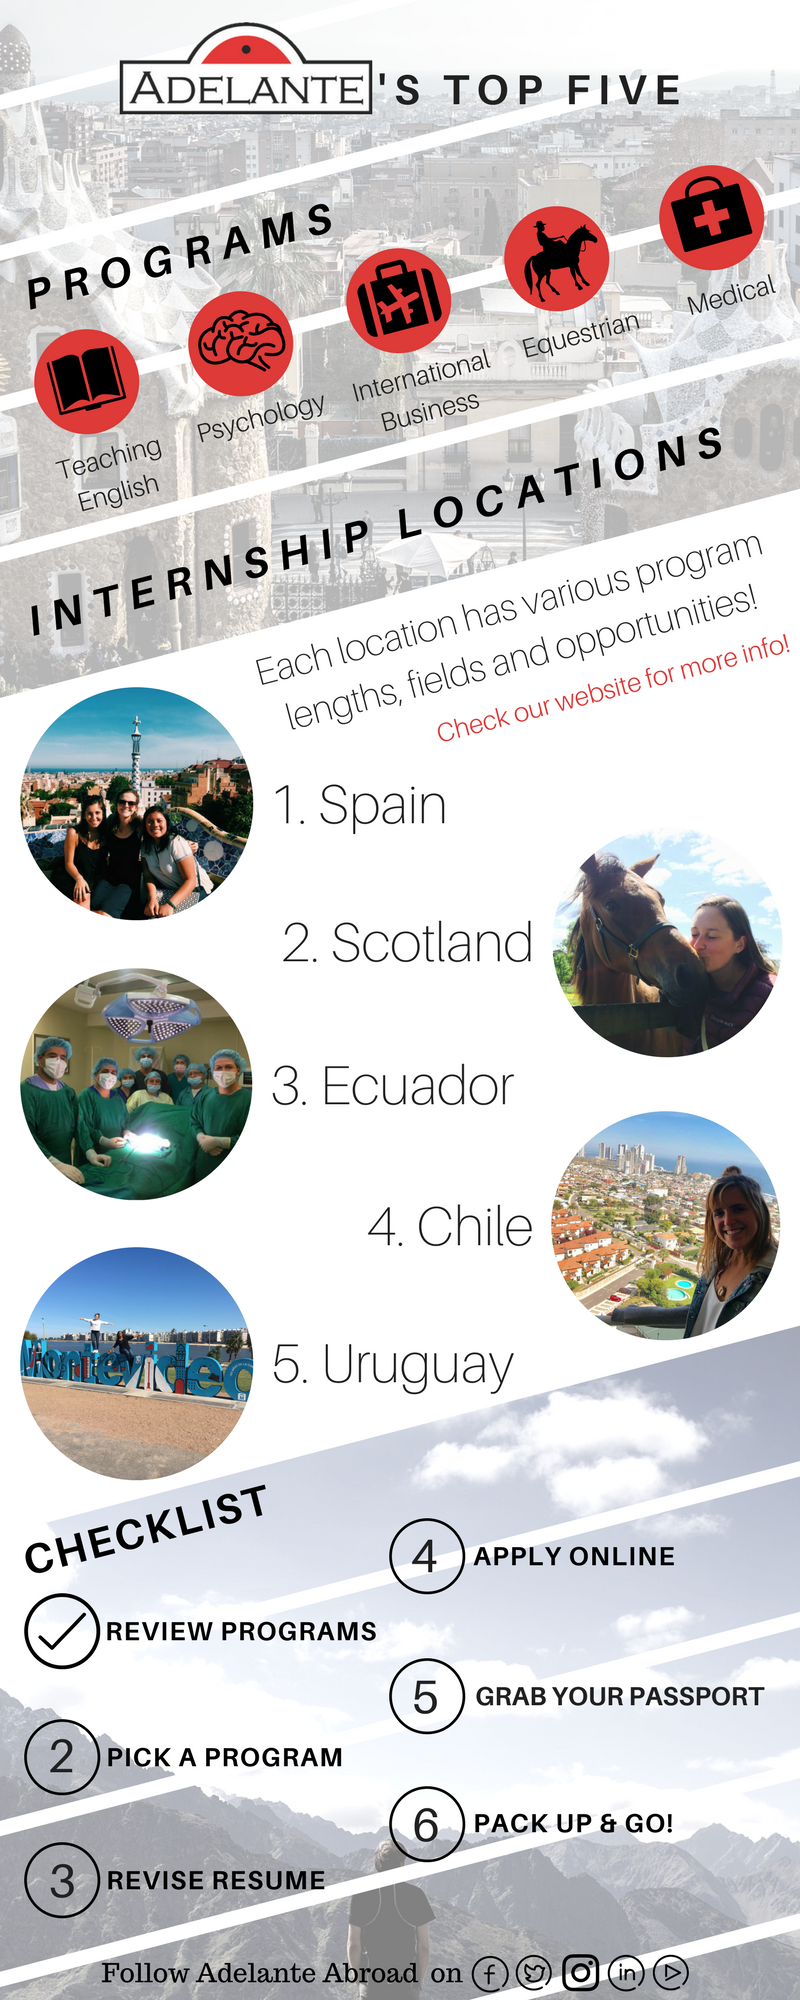 Top 5 Countries for Internships Abroad in 2018 - Adelante Abroad